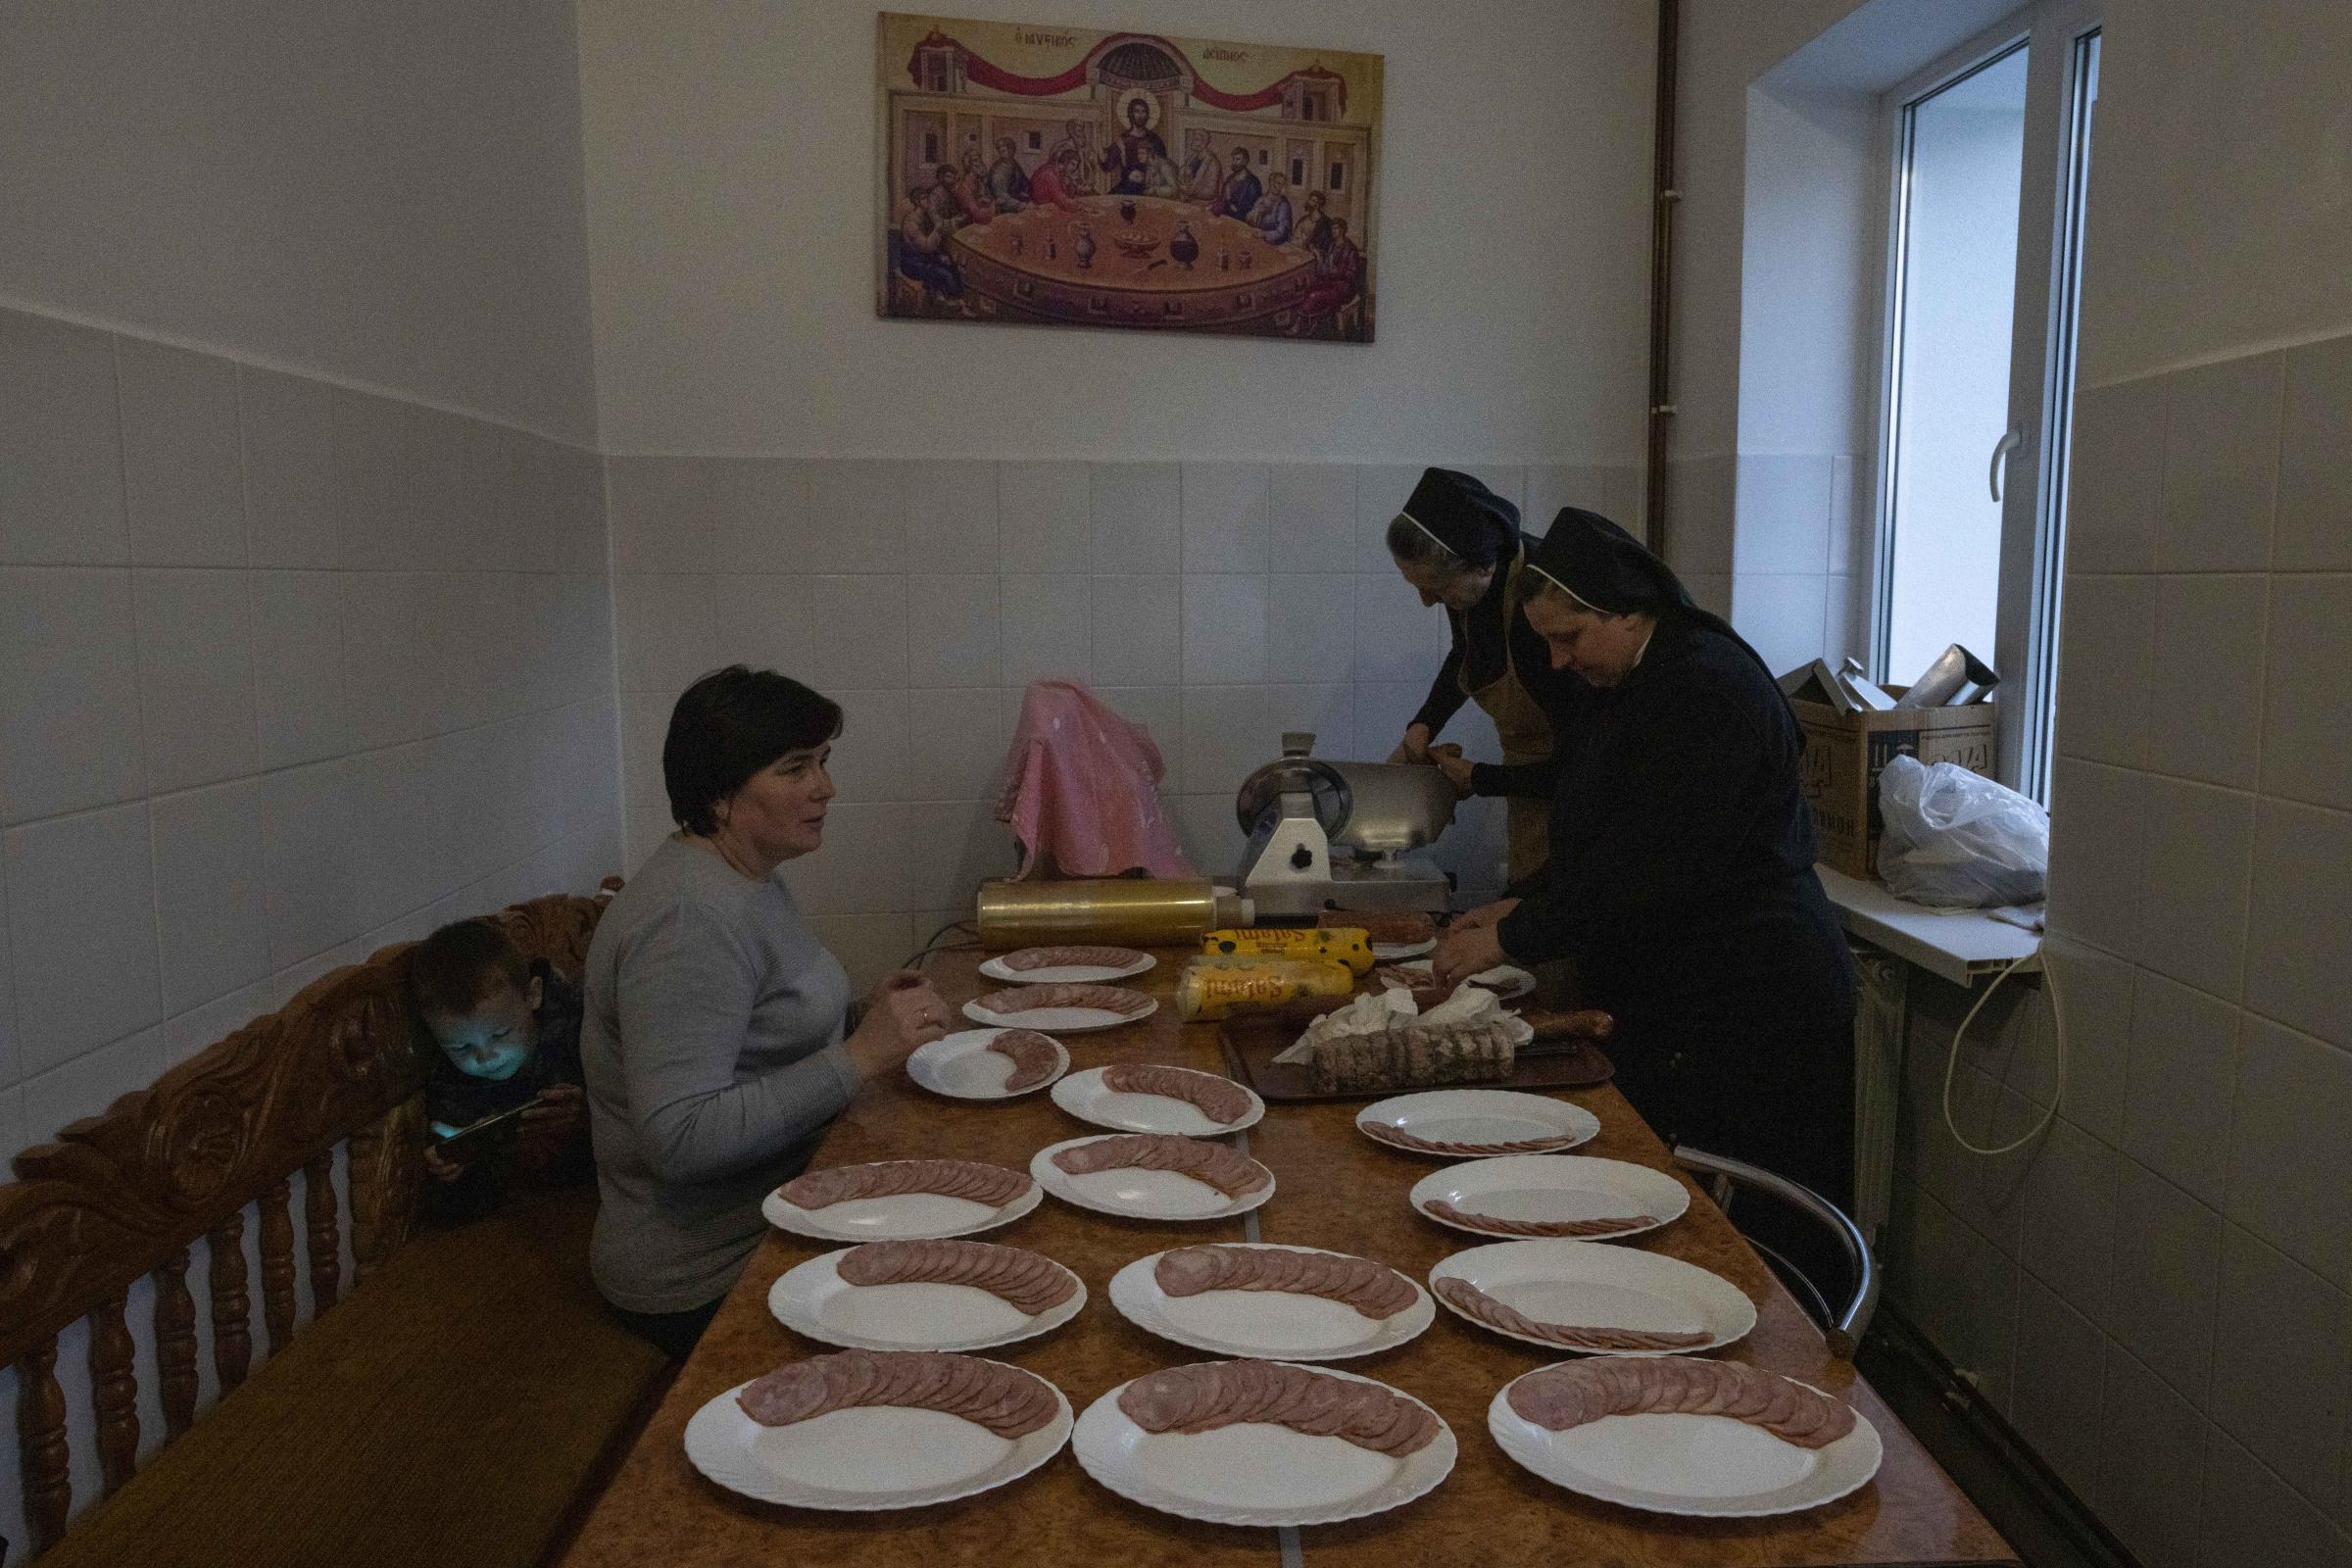 Nuns and internally displaced woman and her son, cut slices of meat.